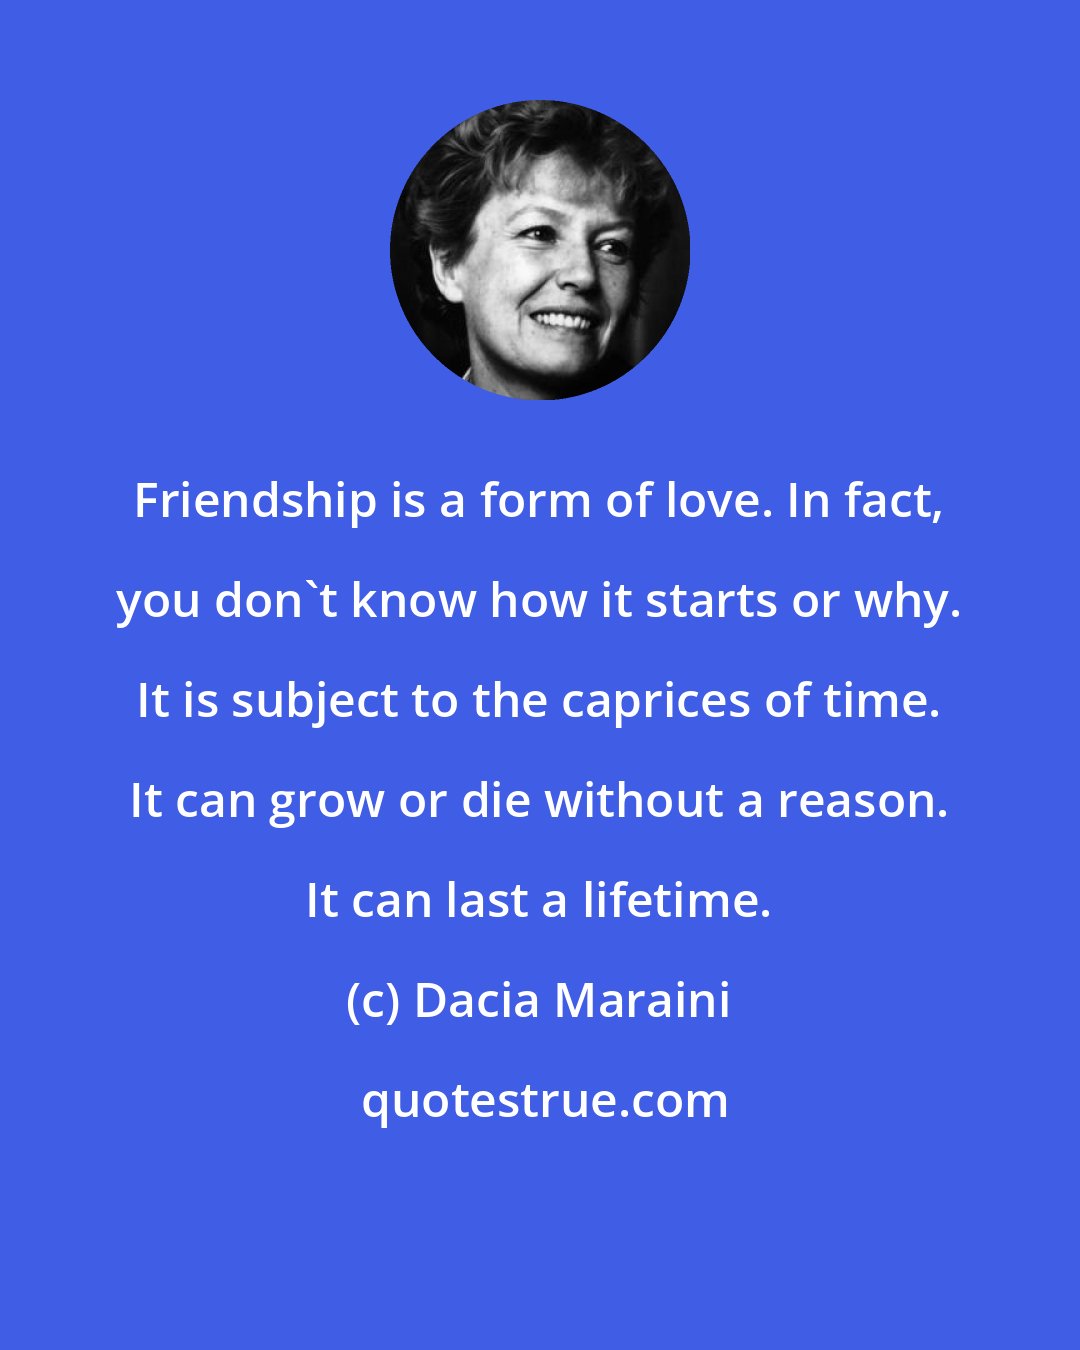 Dacia Maraini: Friendship is a form of love. In fact, you don't know how it starts or why. It is subject to the caprices of time. It can grow or die without a reason. It can last a lifetime.